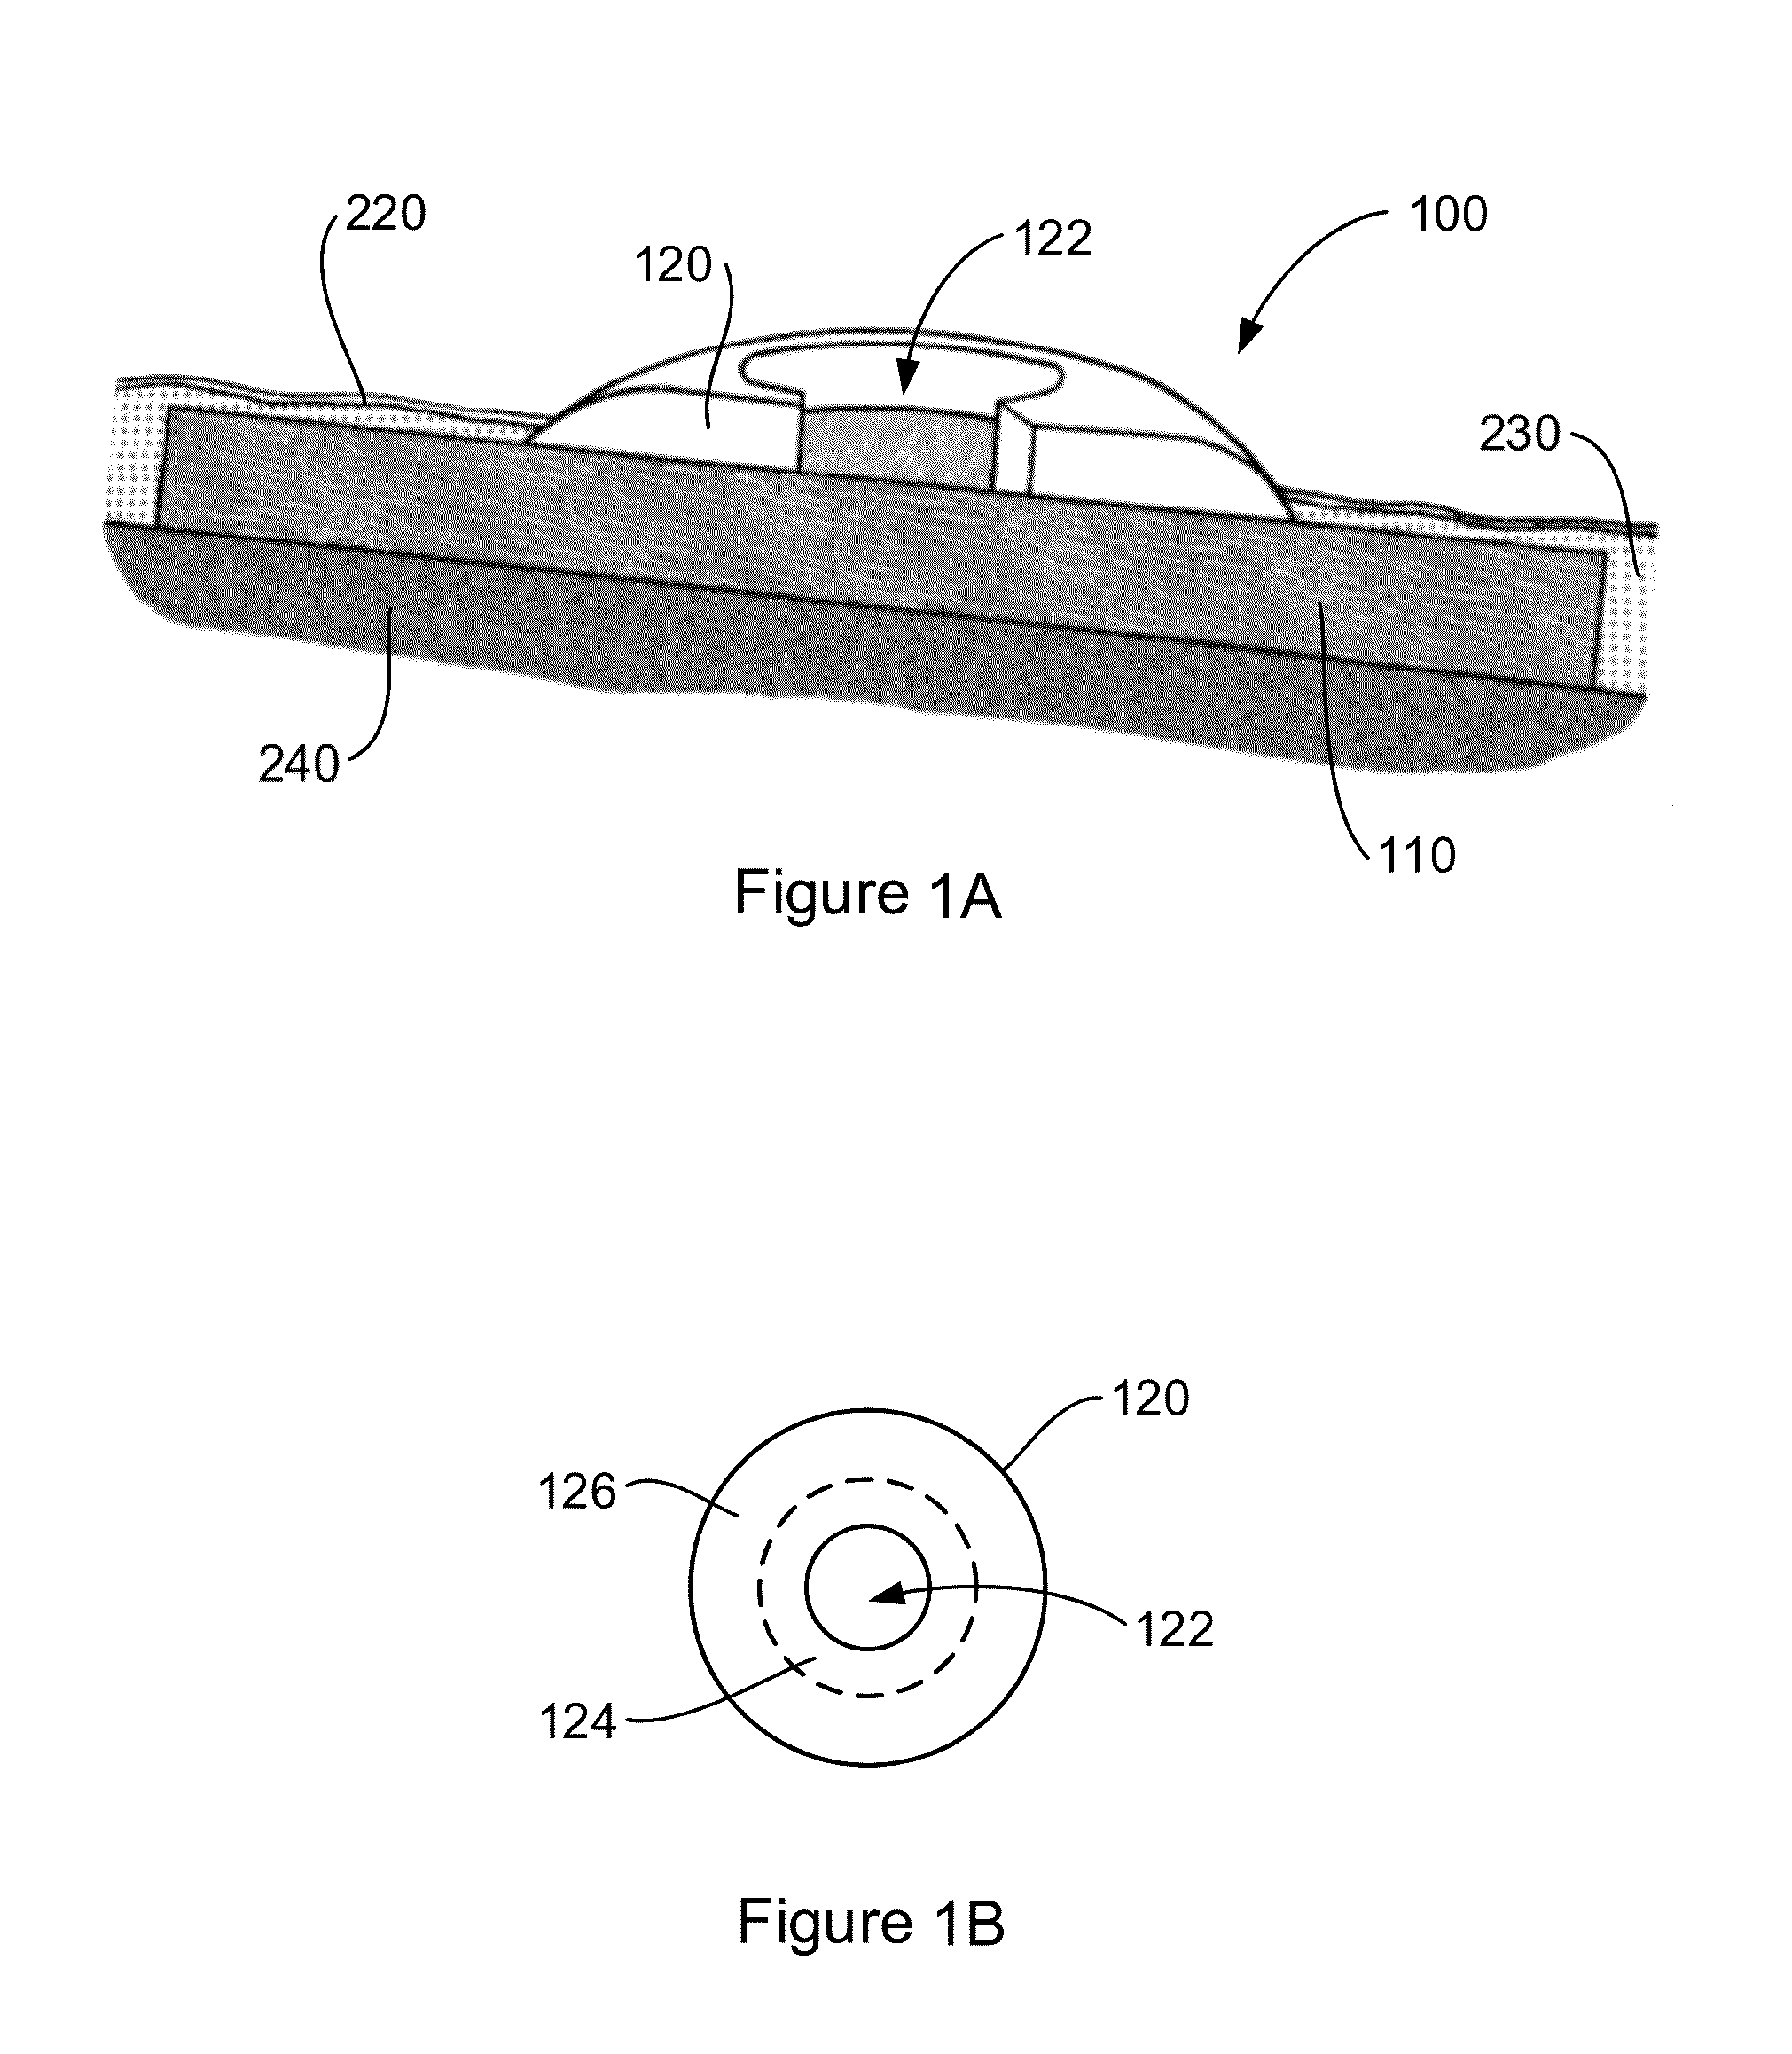 Implantable interface device